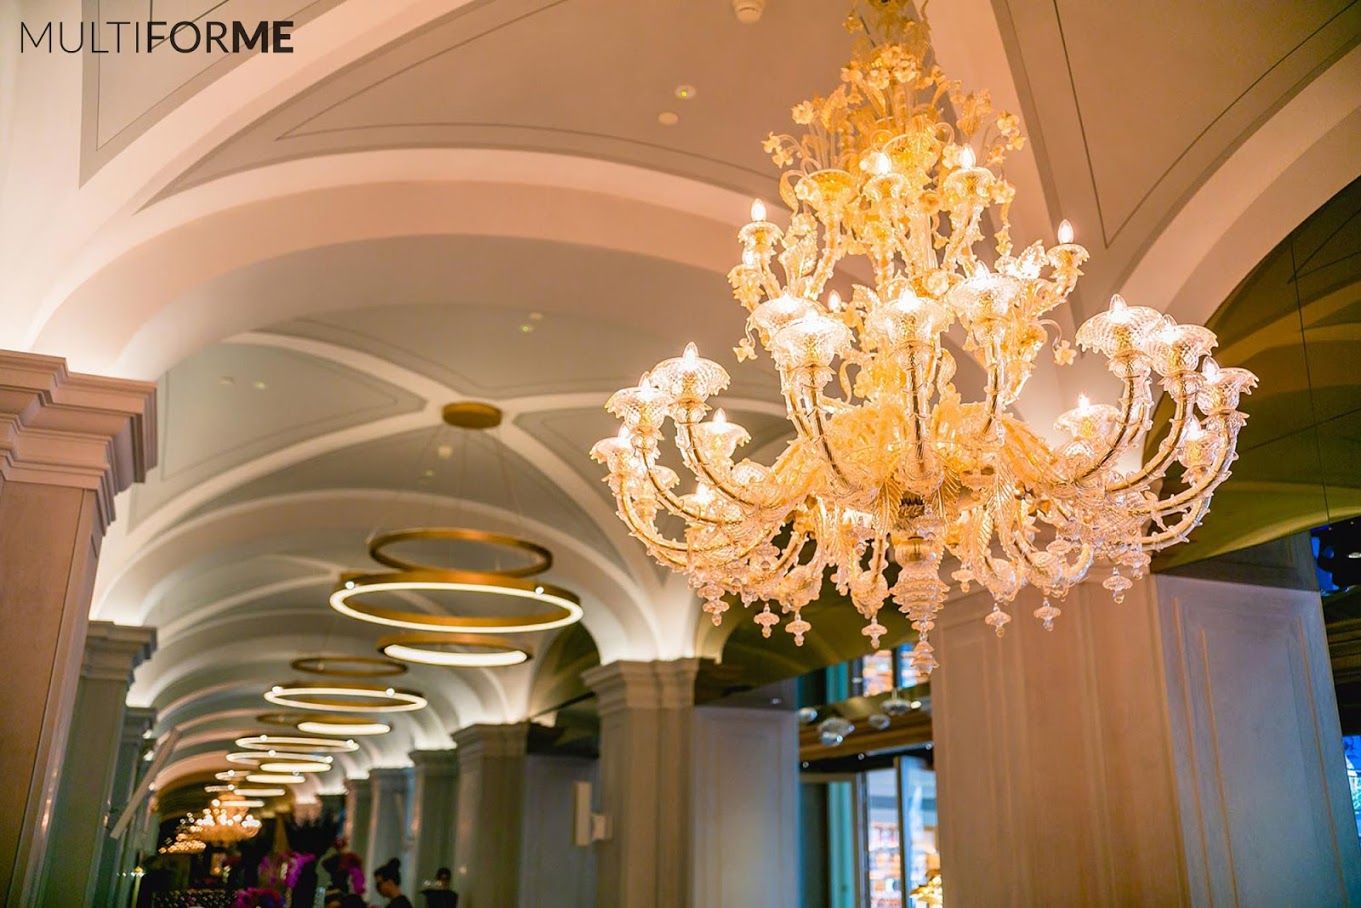 Corridor with chandeliers and vaulted ceiling MULTIFORME® lighting Ruang Komersial Hotels